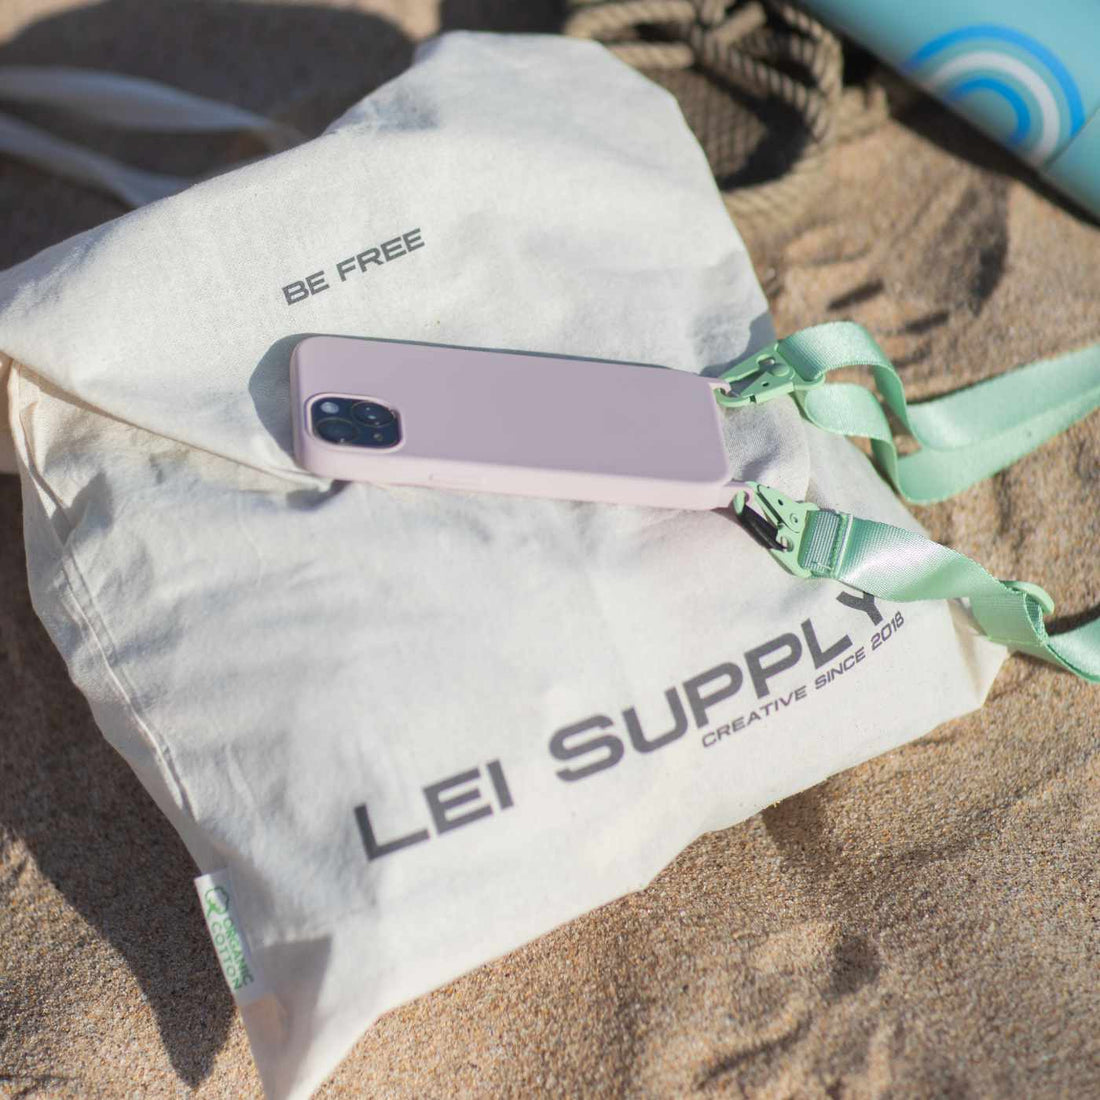 Limited Lei Supply Bag - Stofftasche 100% Organic Cotton